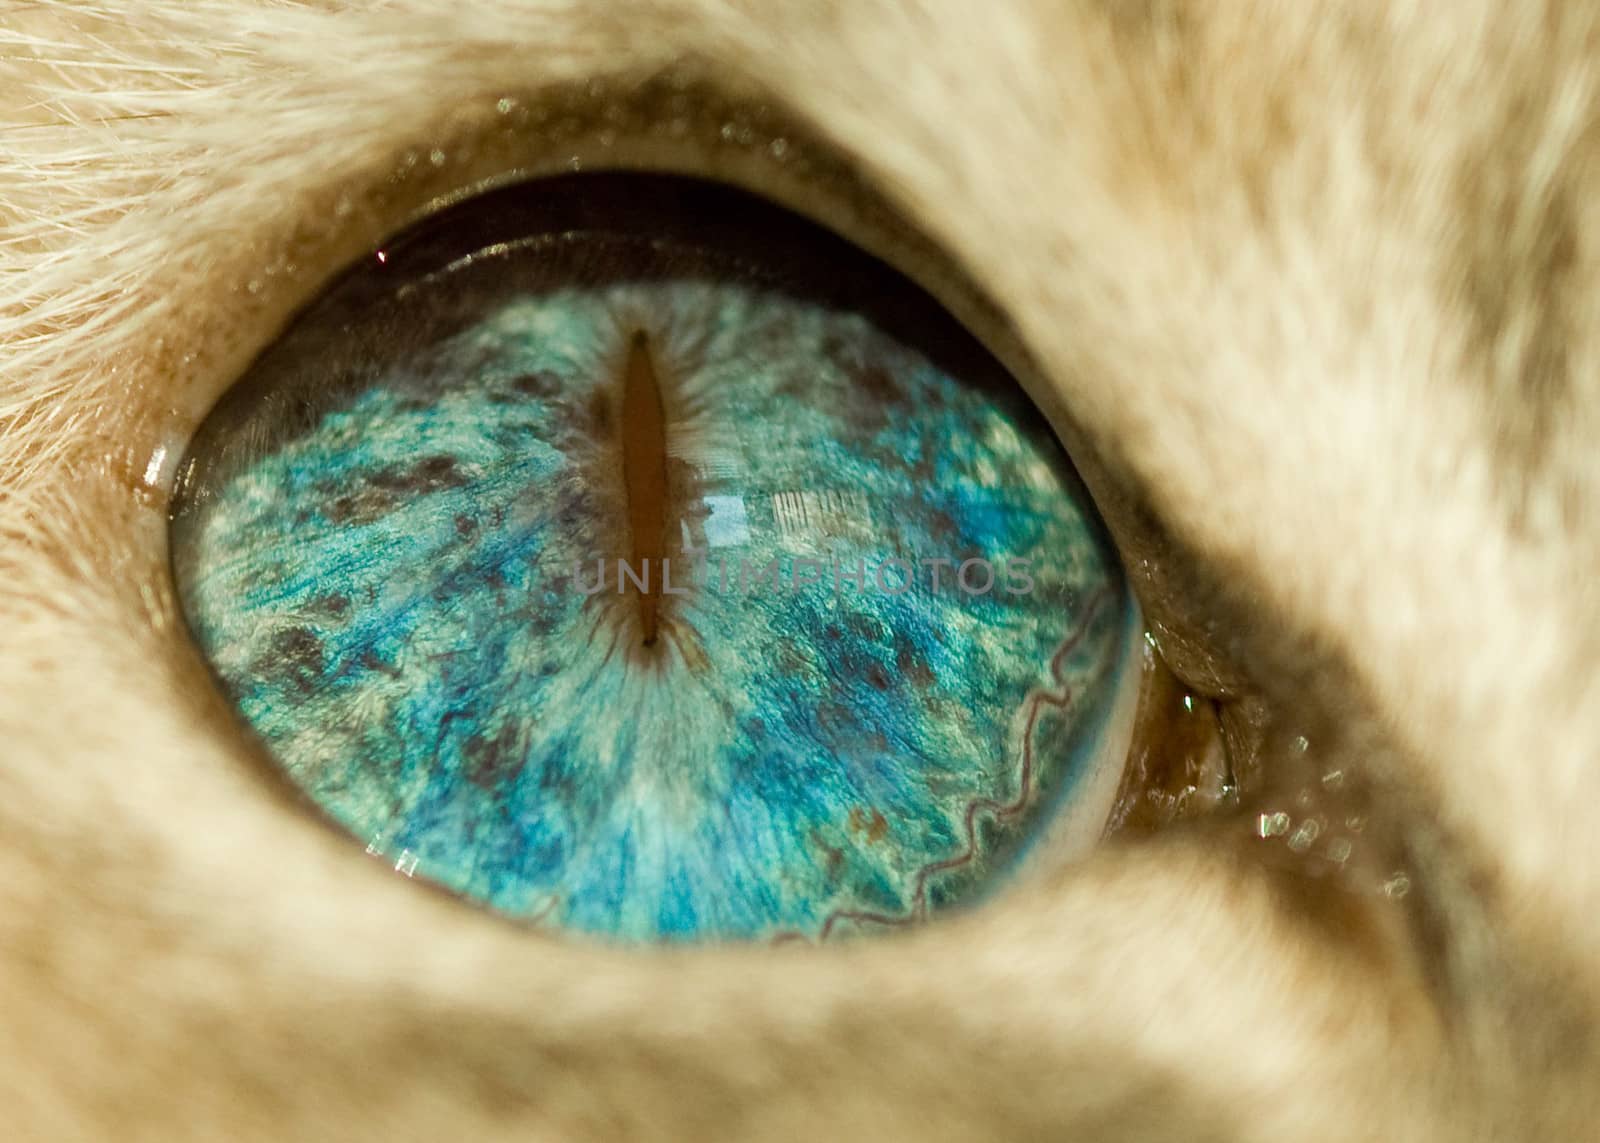 The blue eye of a white cat.